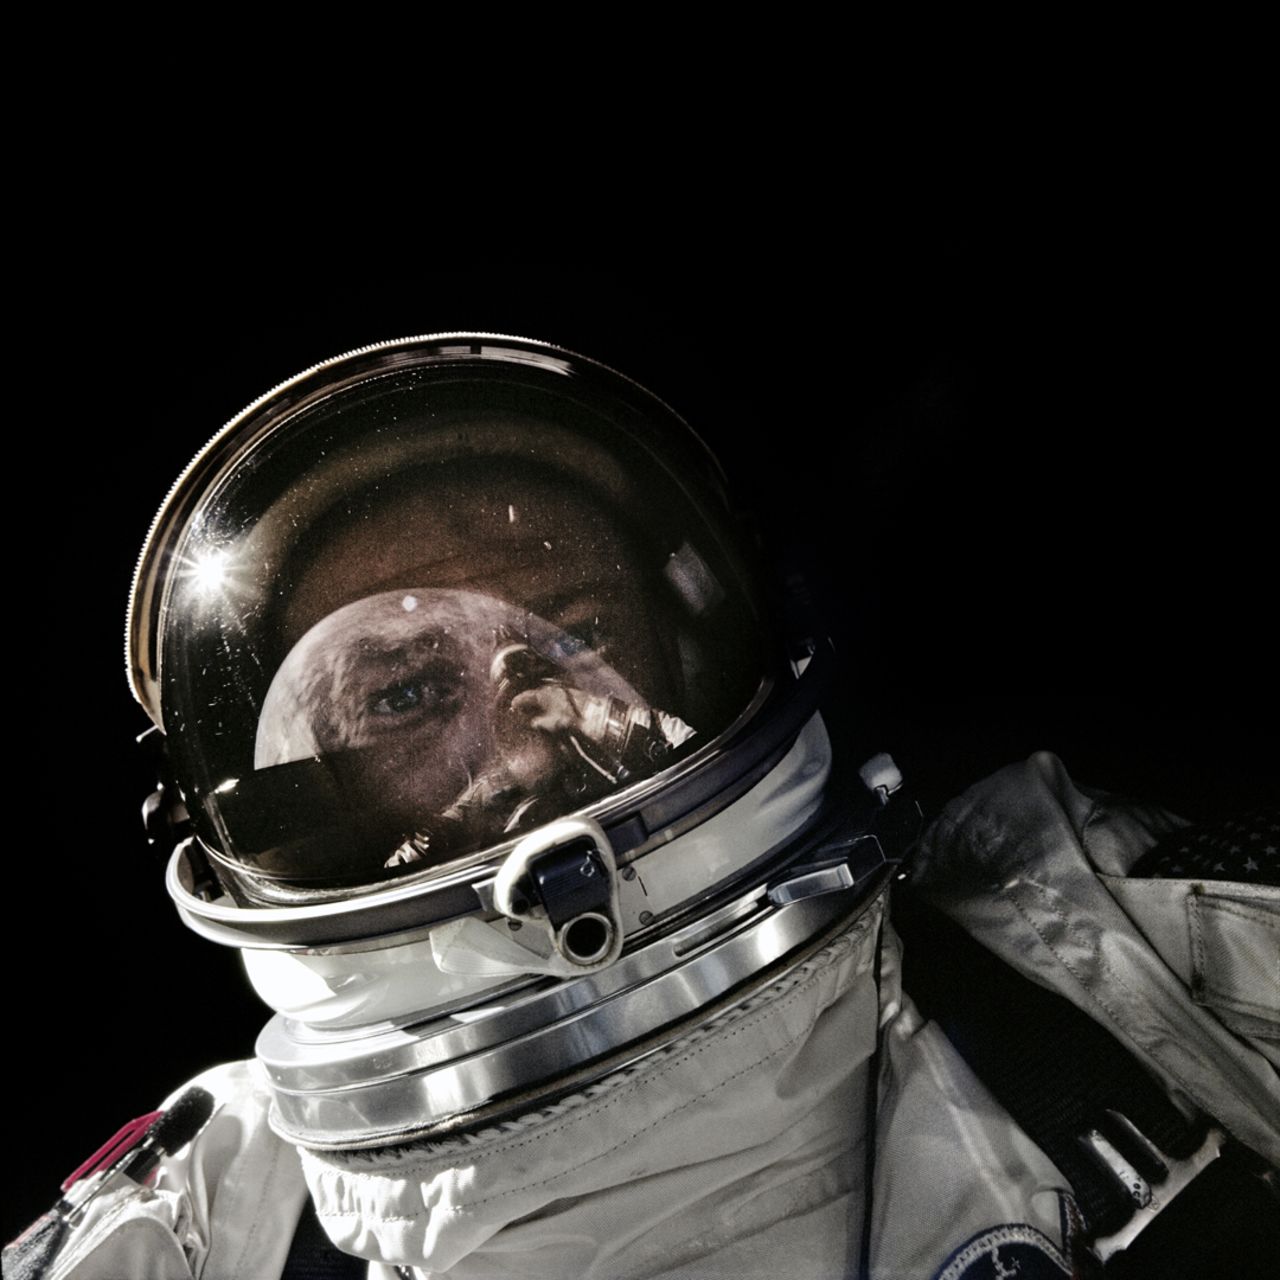 Long fascinated by space, British author and imaging specialist Andy Saunders dedicated over 10,000 hours to restoring flight film from the Apollo missions. The result is "Apollo Remastered," a stunning book that sheds new light on humanity's very first ventures to the moon. Pictured, Buzz Aldrin during Gemini 12's crewed spaceflight in November 1966.